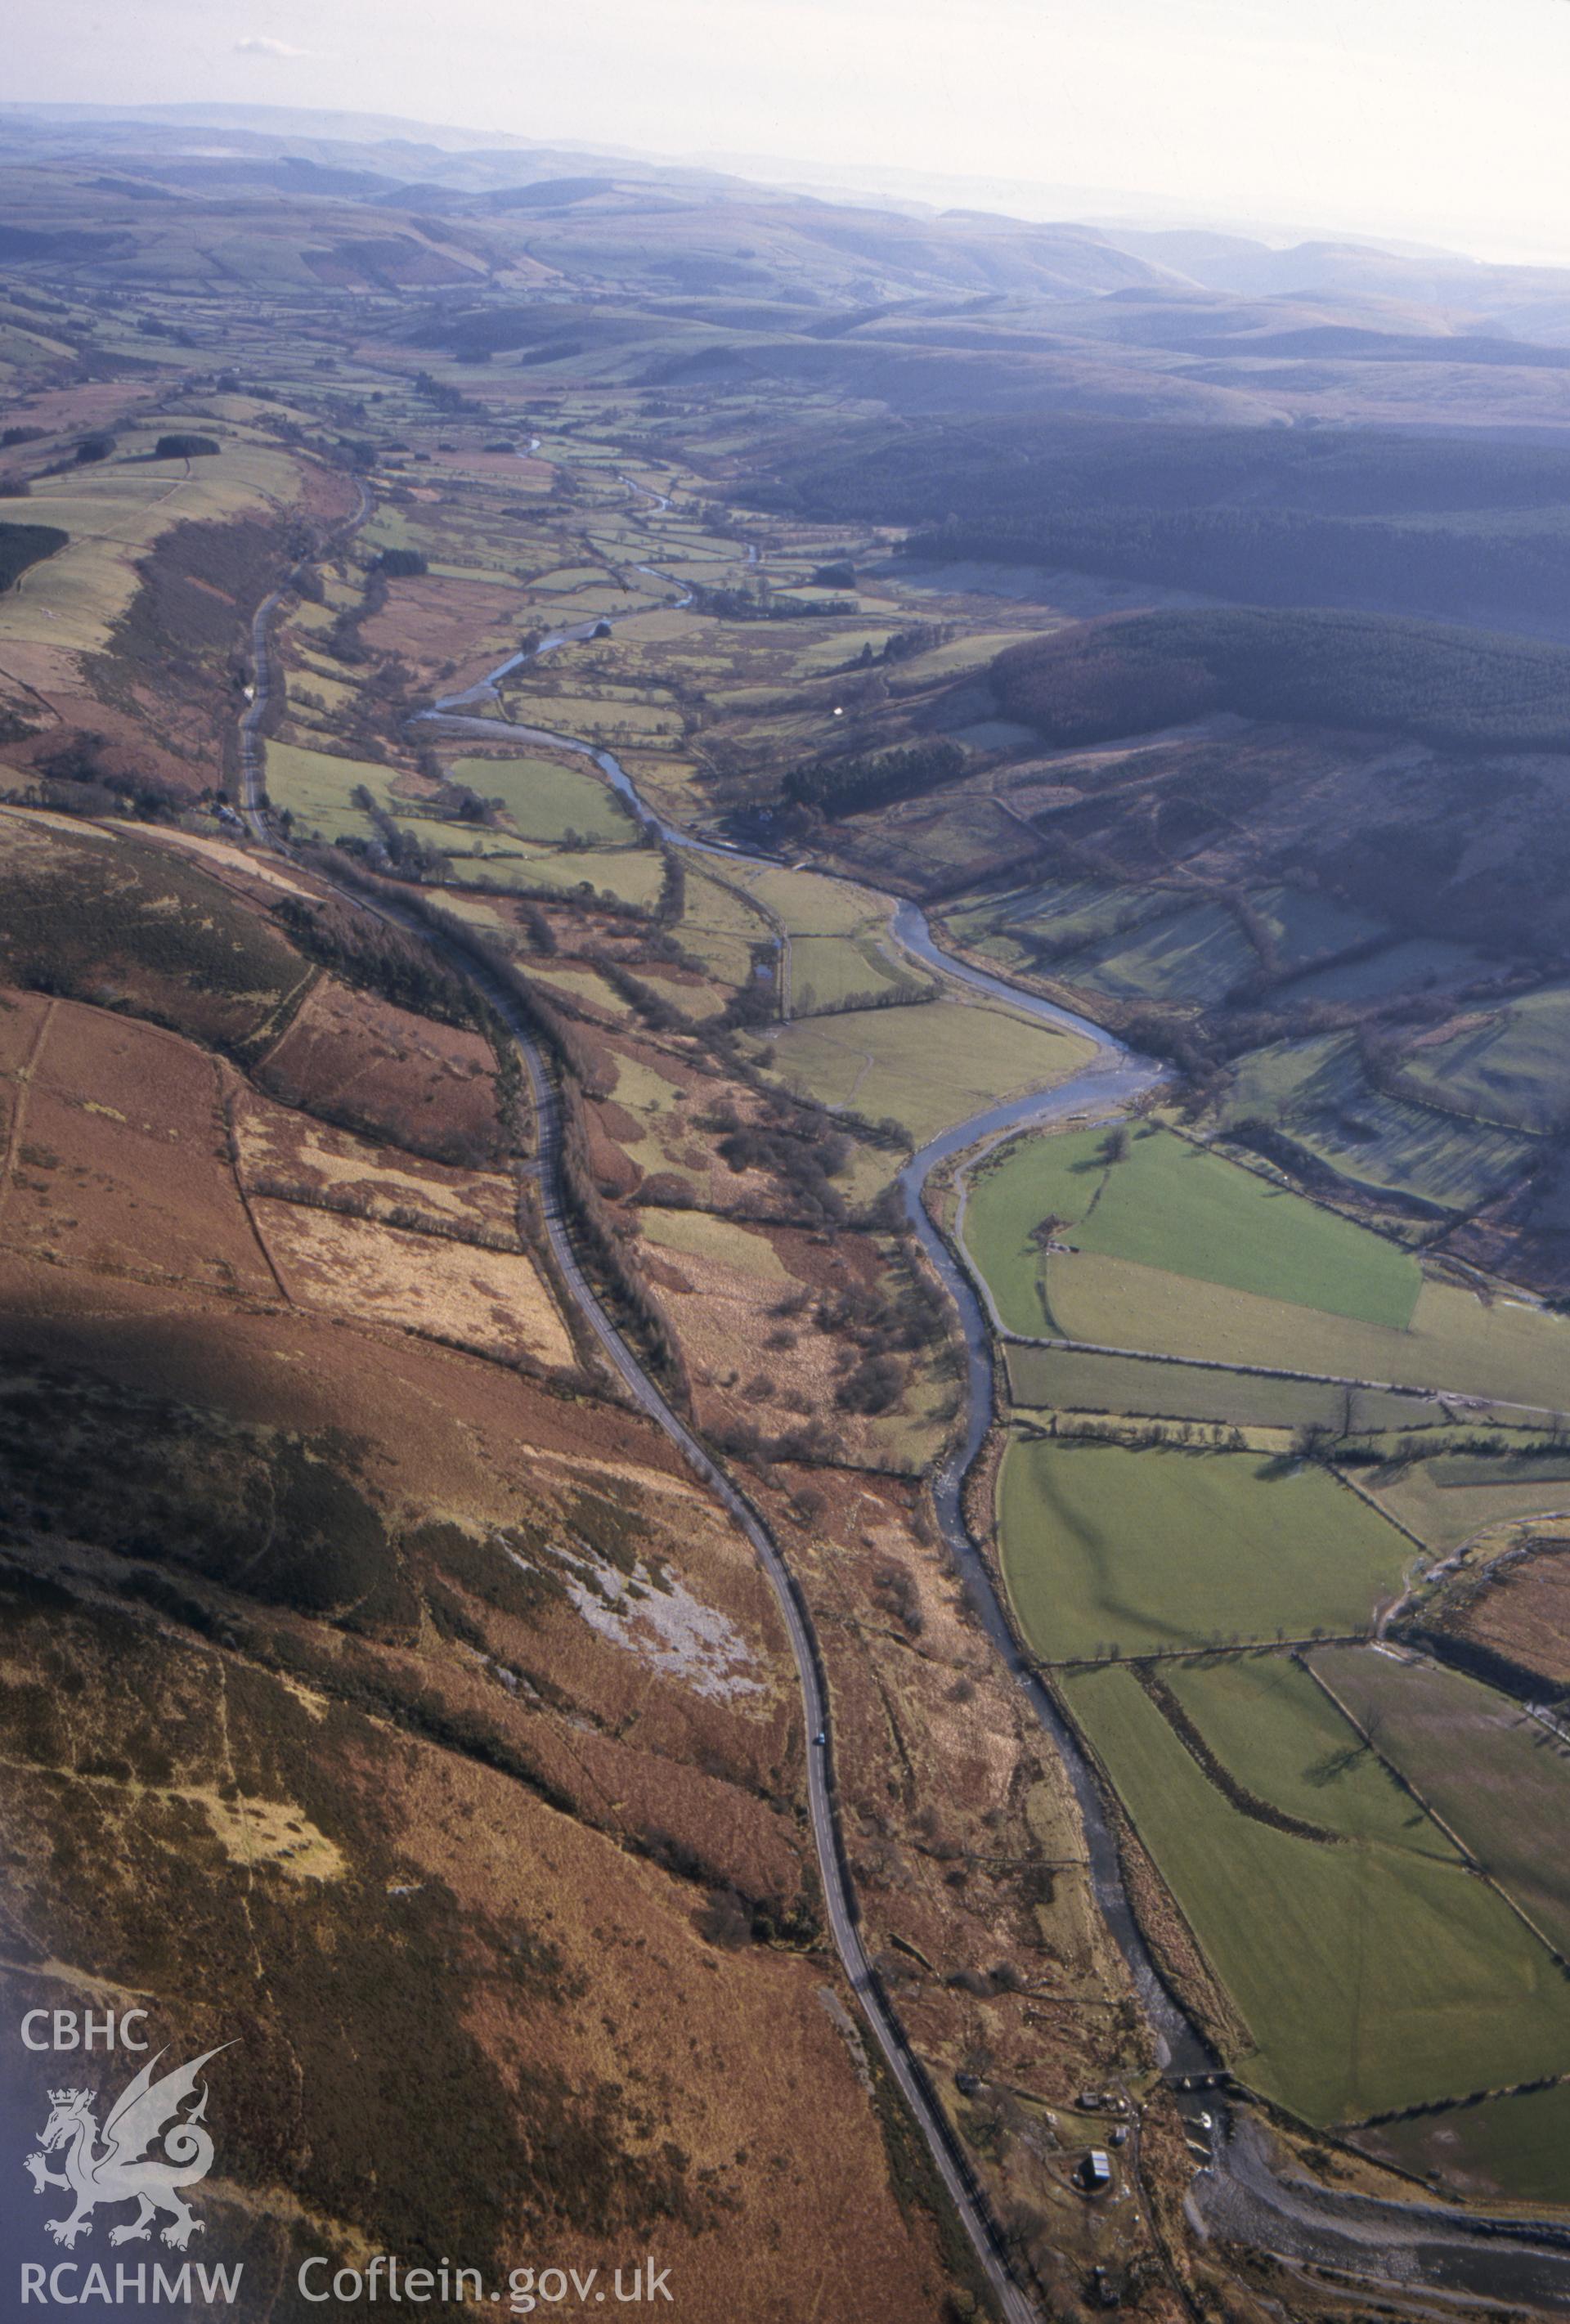 Slide of RCAHMW colour oblique aerial photograph of the Wye Valley, taken by T.G. Driver, 9/2/2001.